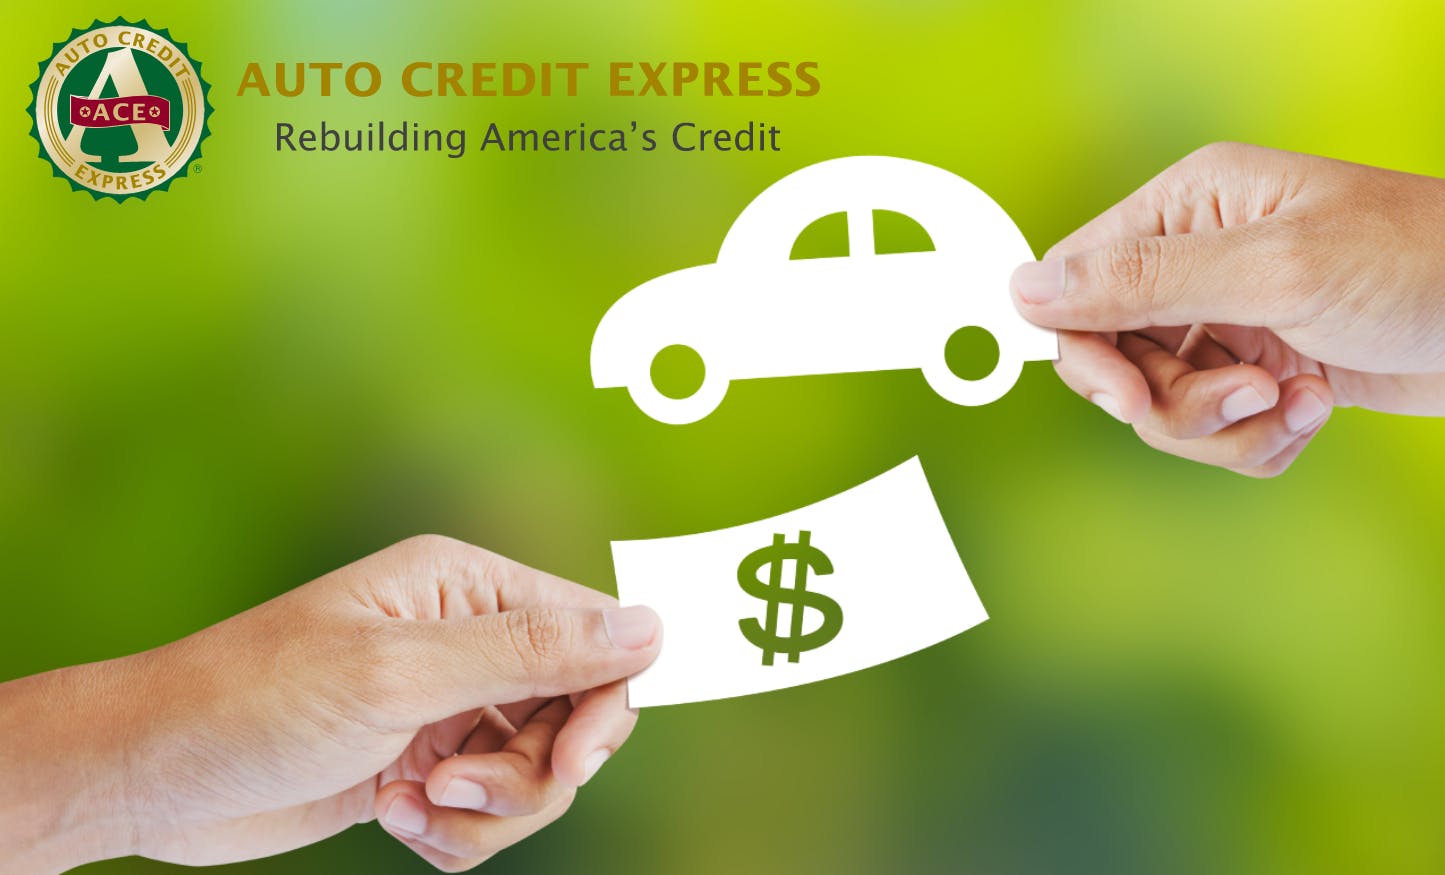 Auto Credit Express: Auto Loan Broker Service Review